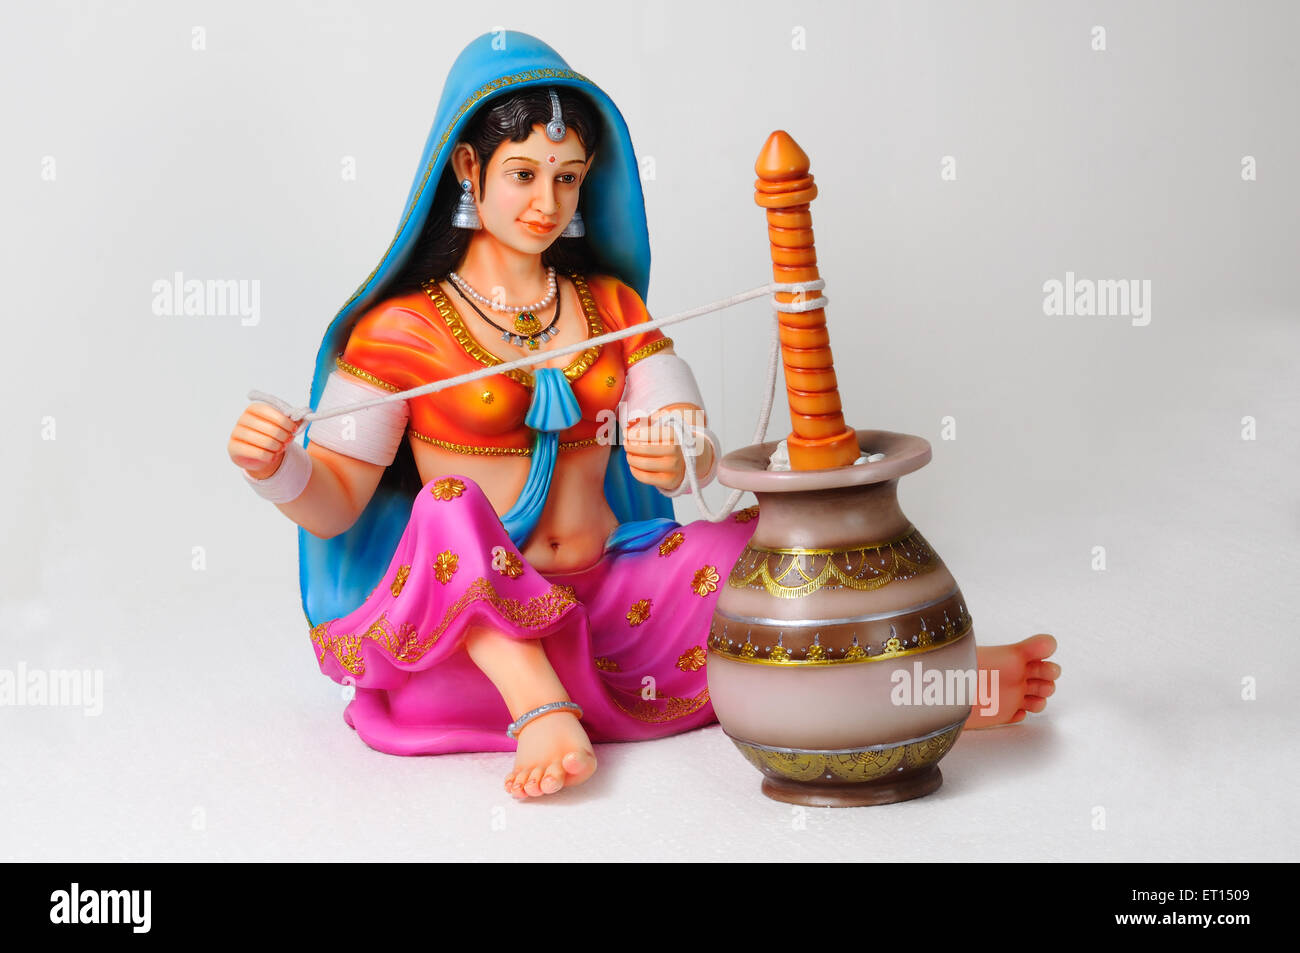 Clay figurine ; statue of rajasthani woman with churning pot preparing buttermilk Stock Photo